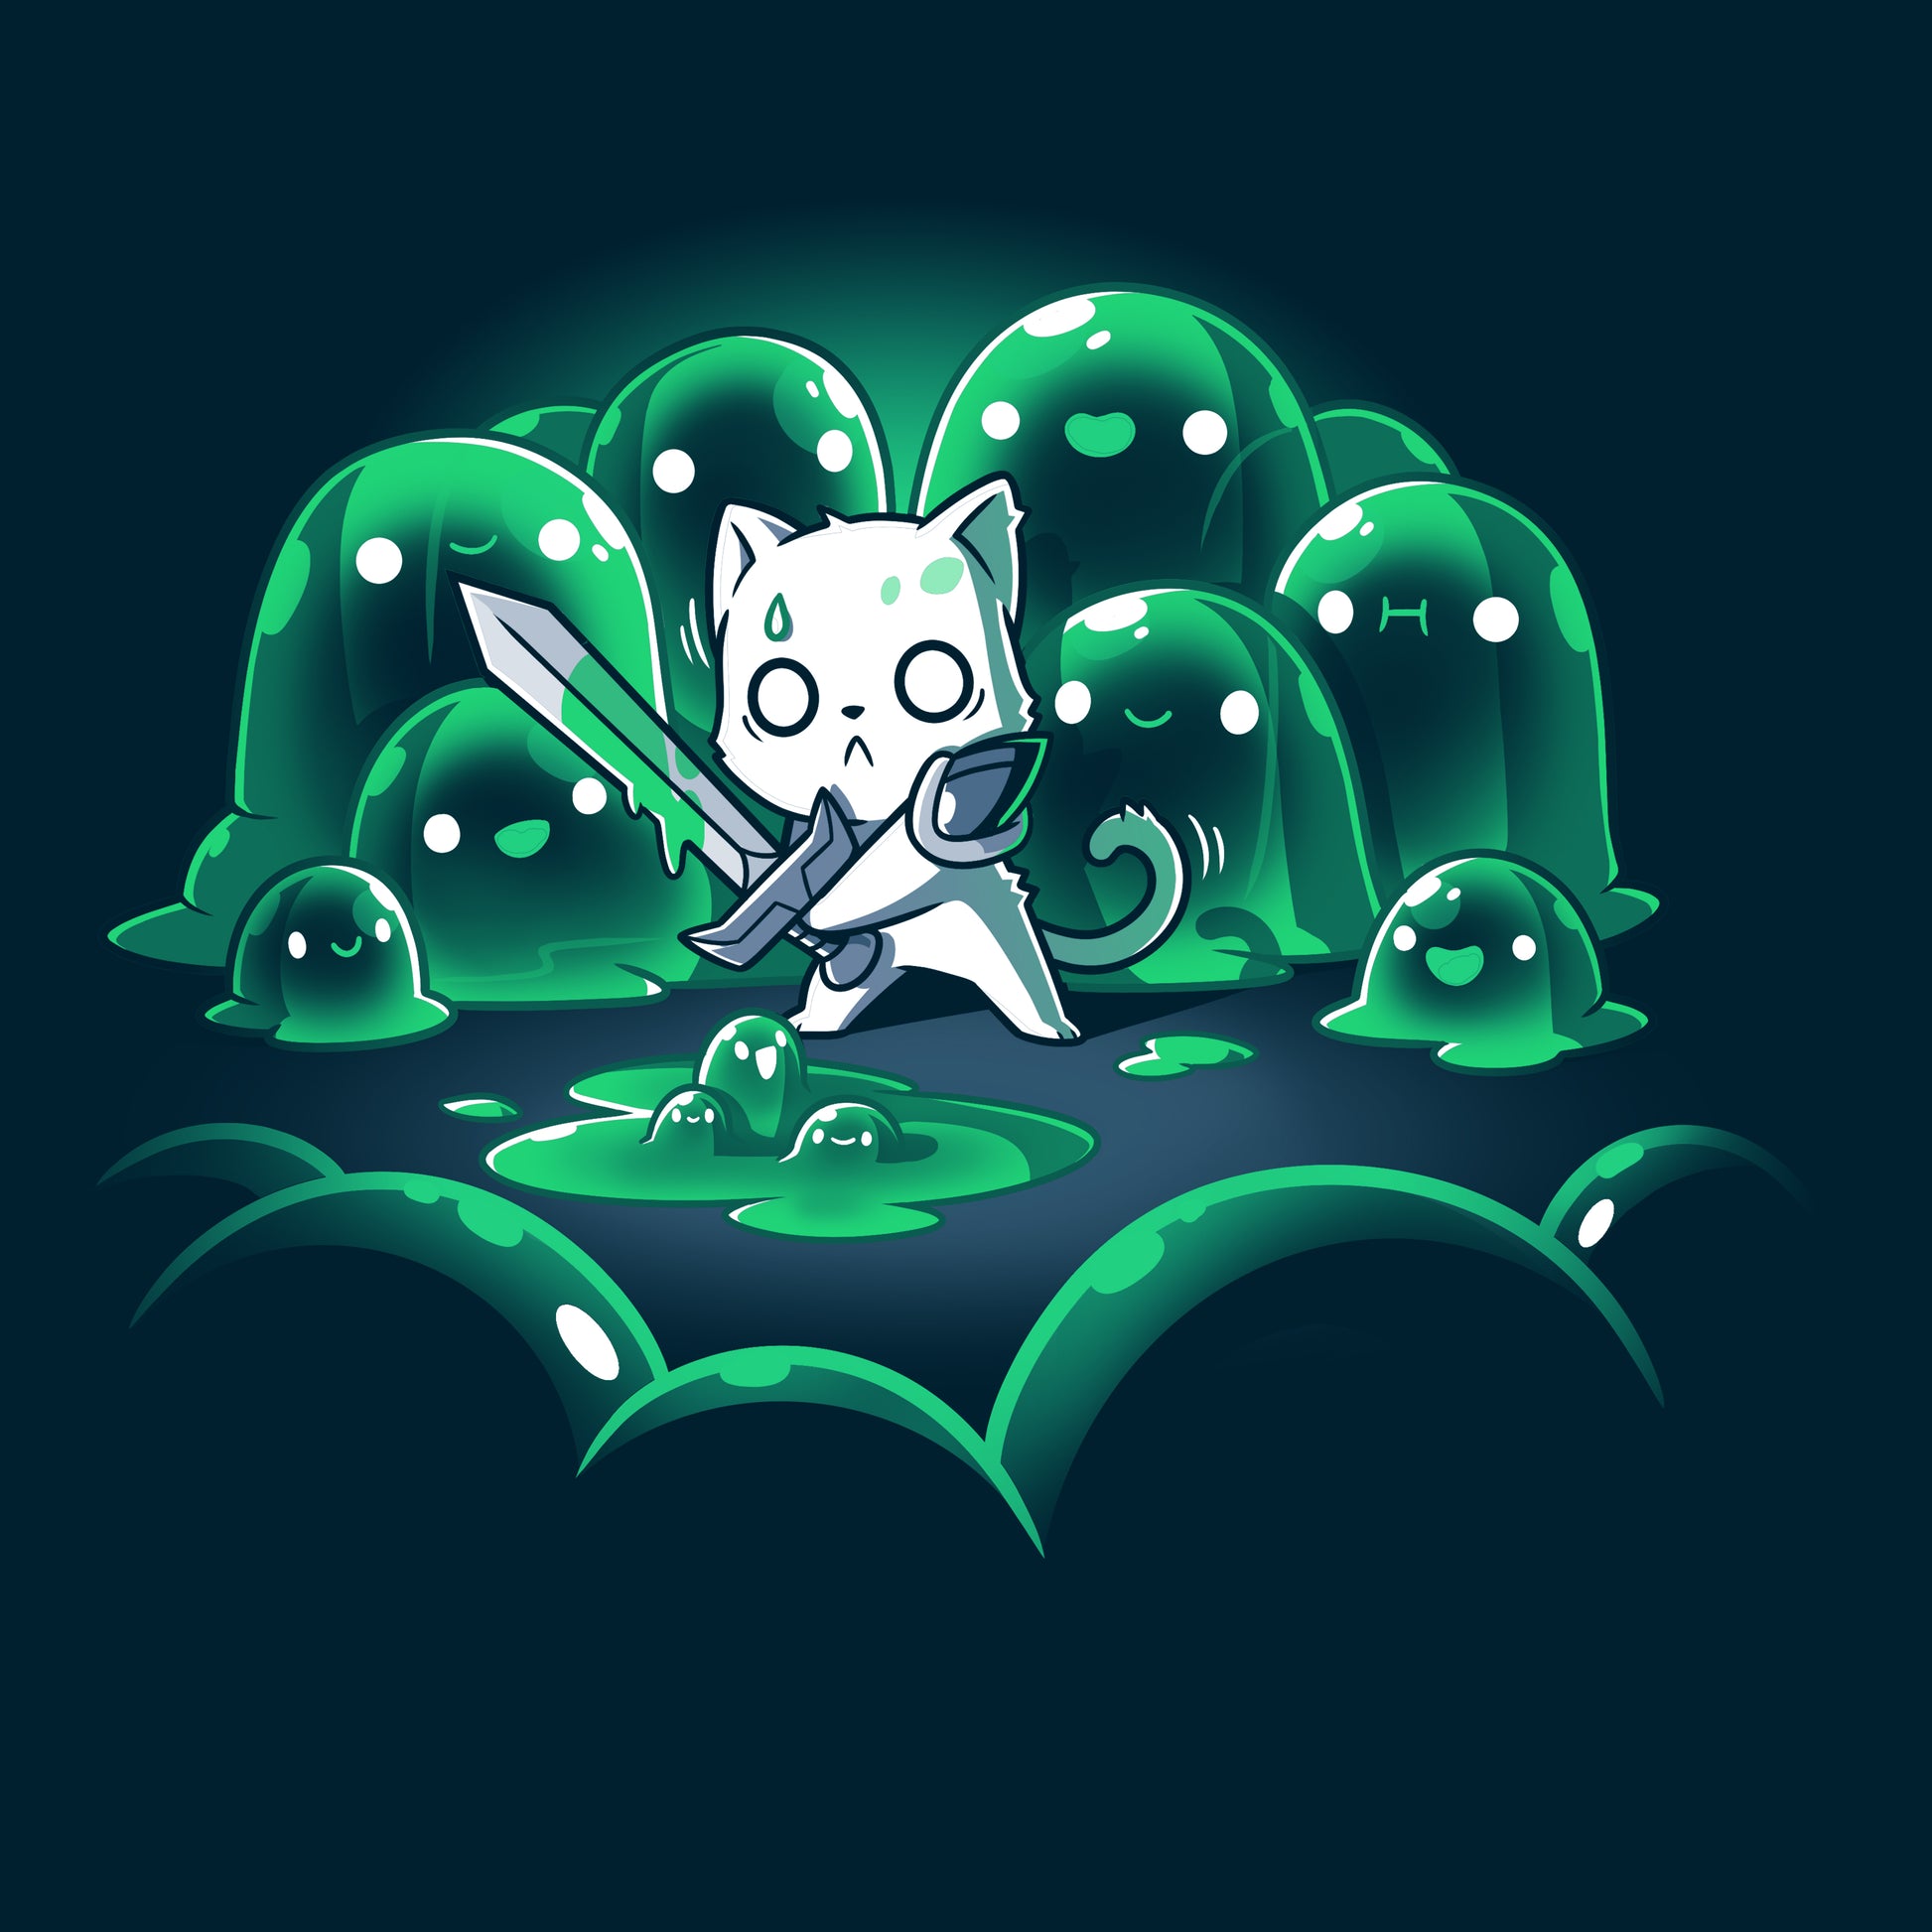 A cat character holding a sword stands surrounded by green, blob-like creatures in a dark environment, depicted on "The Never-Ending Fight" navy blue t-shirt made from Super Soft Ringspun Cotton by monsterdigital.